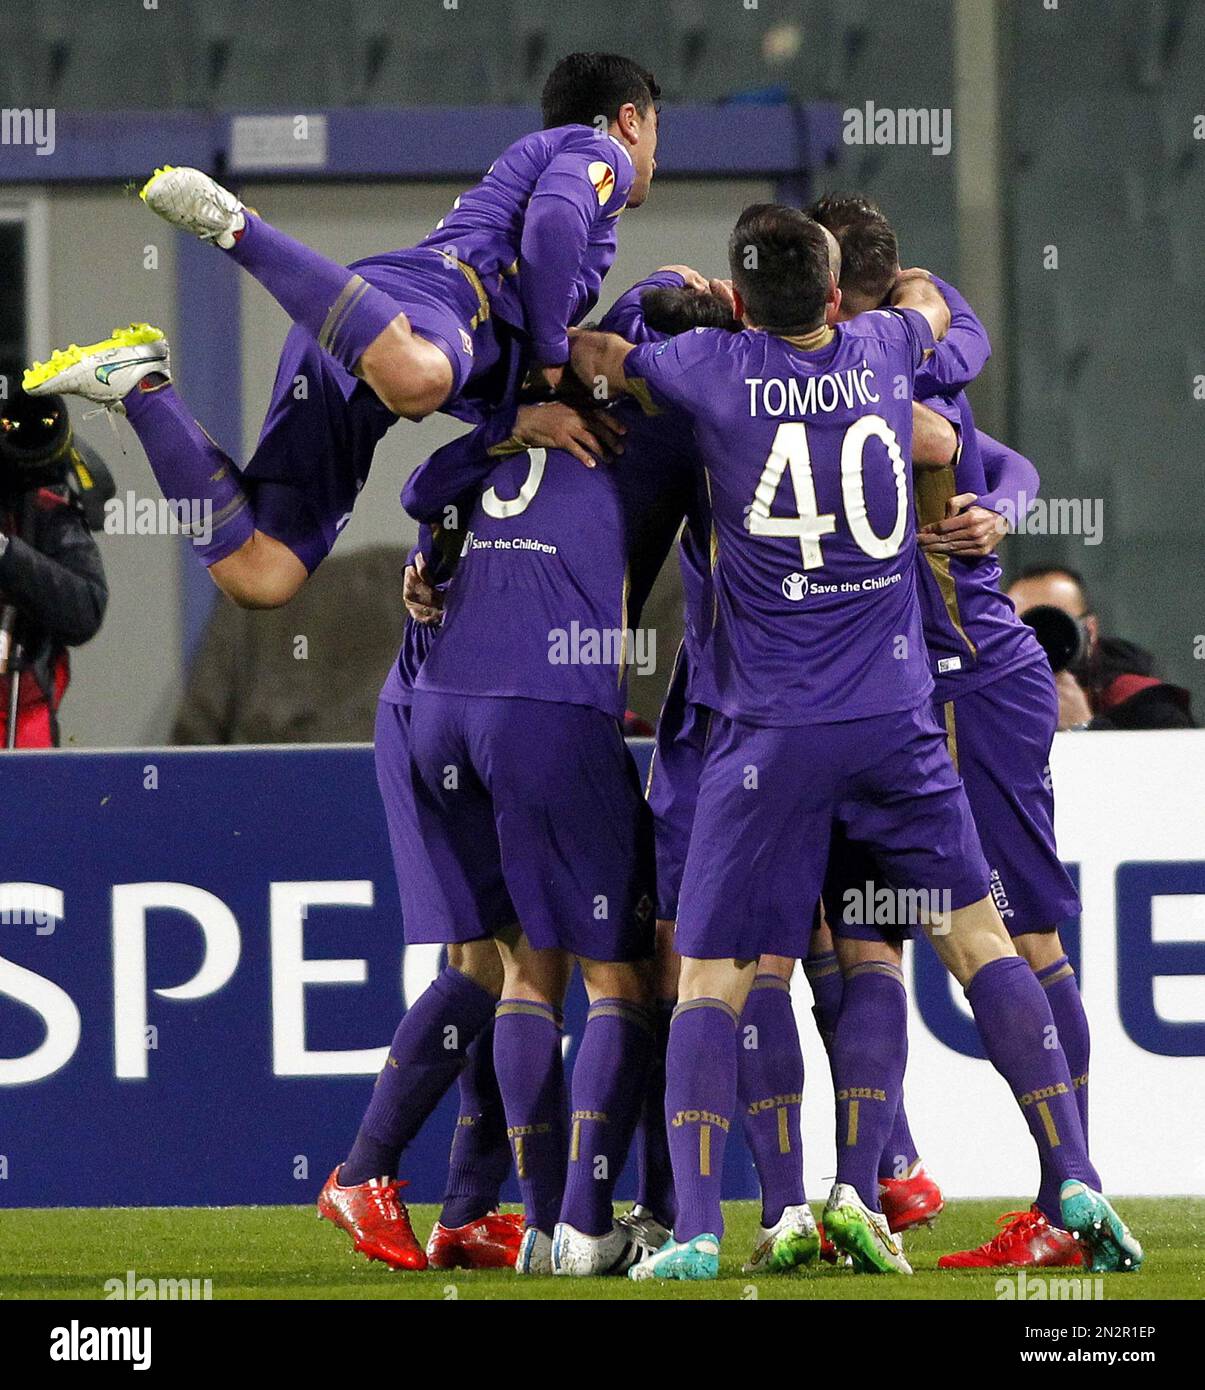 Josip Ilicic of Fiorentina during the Europa League 2014- 2015,Fiorentina -  AS Roma Stade Artemio-Franchi, Florence on March 12 2015 in Florence ,  Italie - Photo Laurent Lairys / DPPI Stock Photo - Alamy